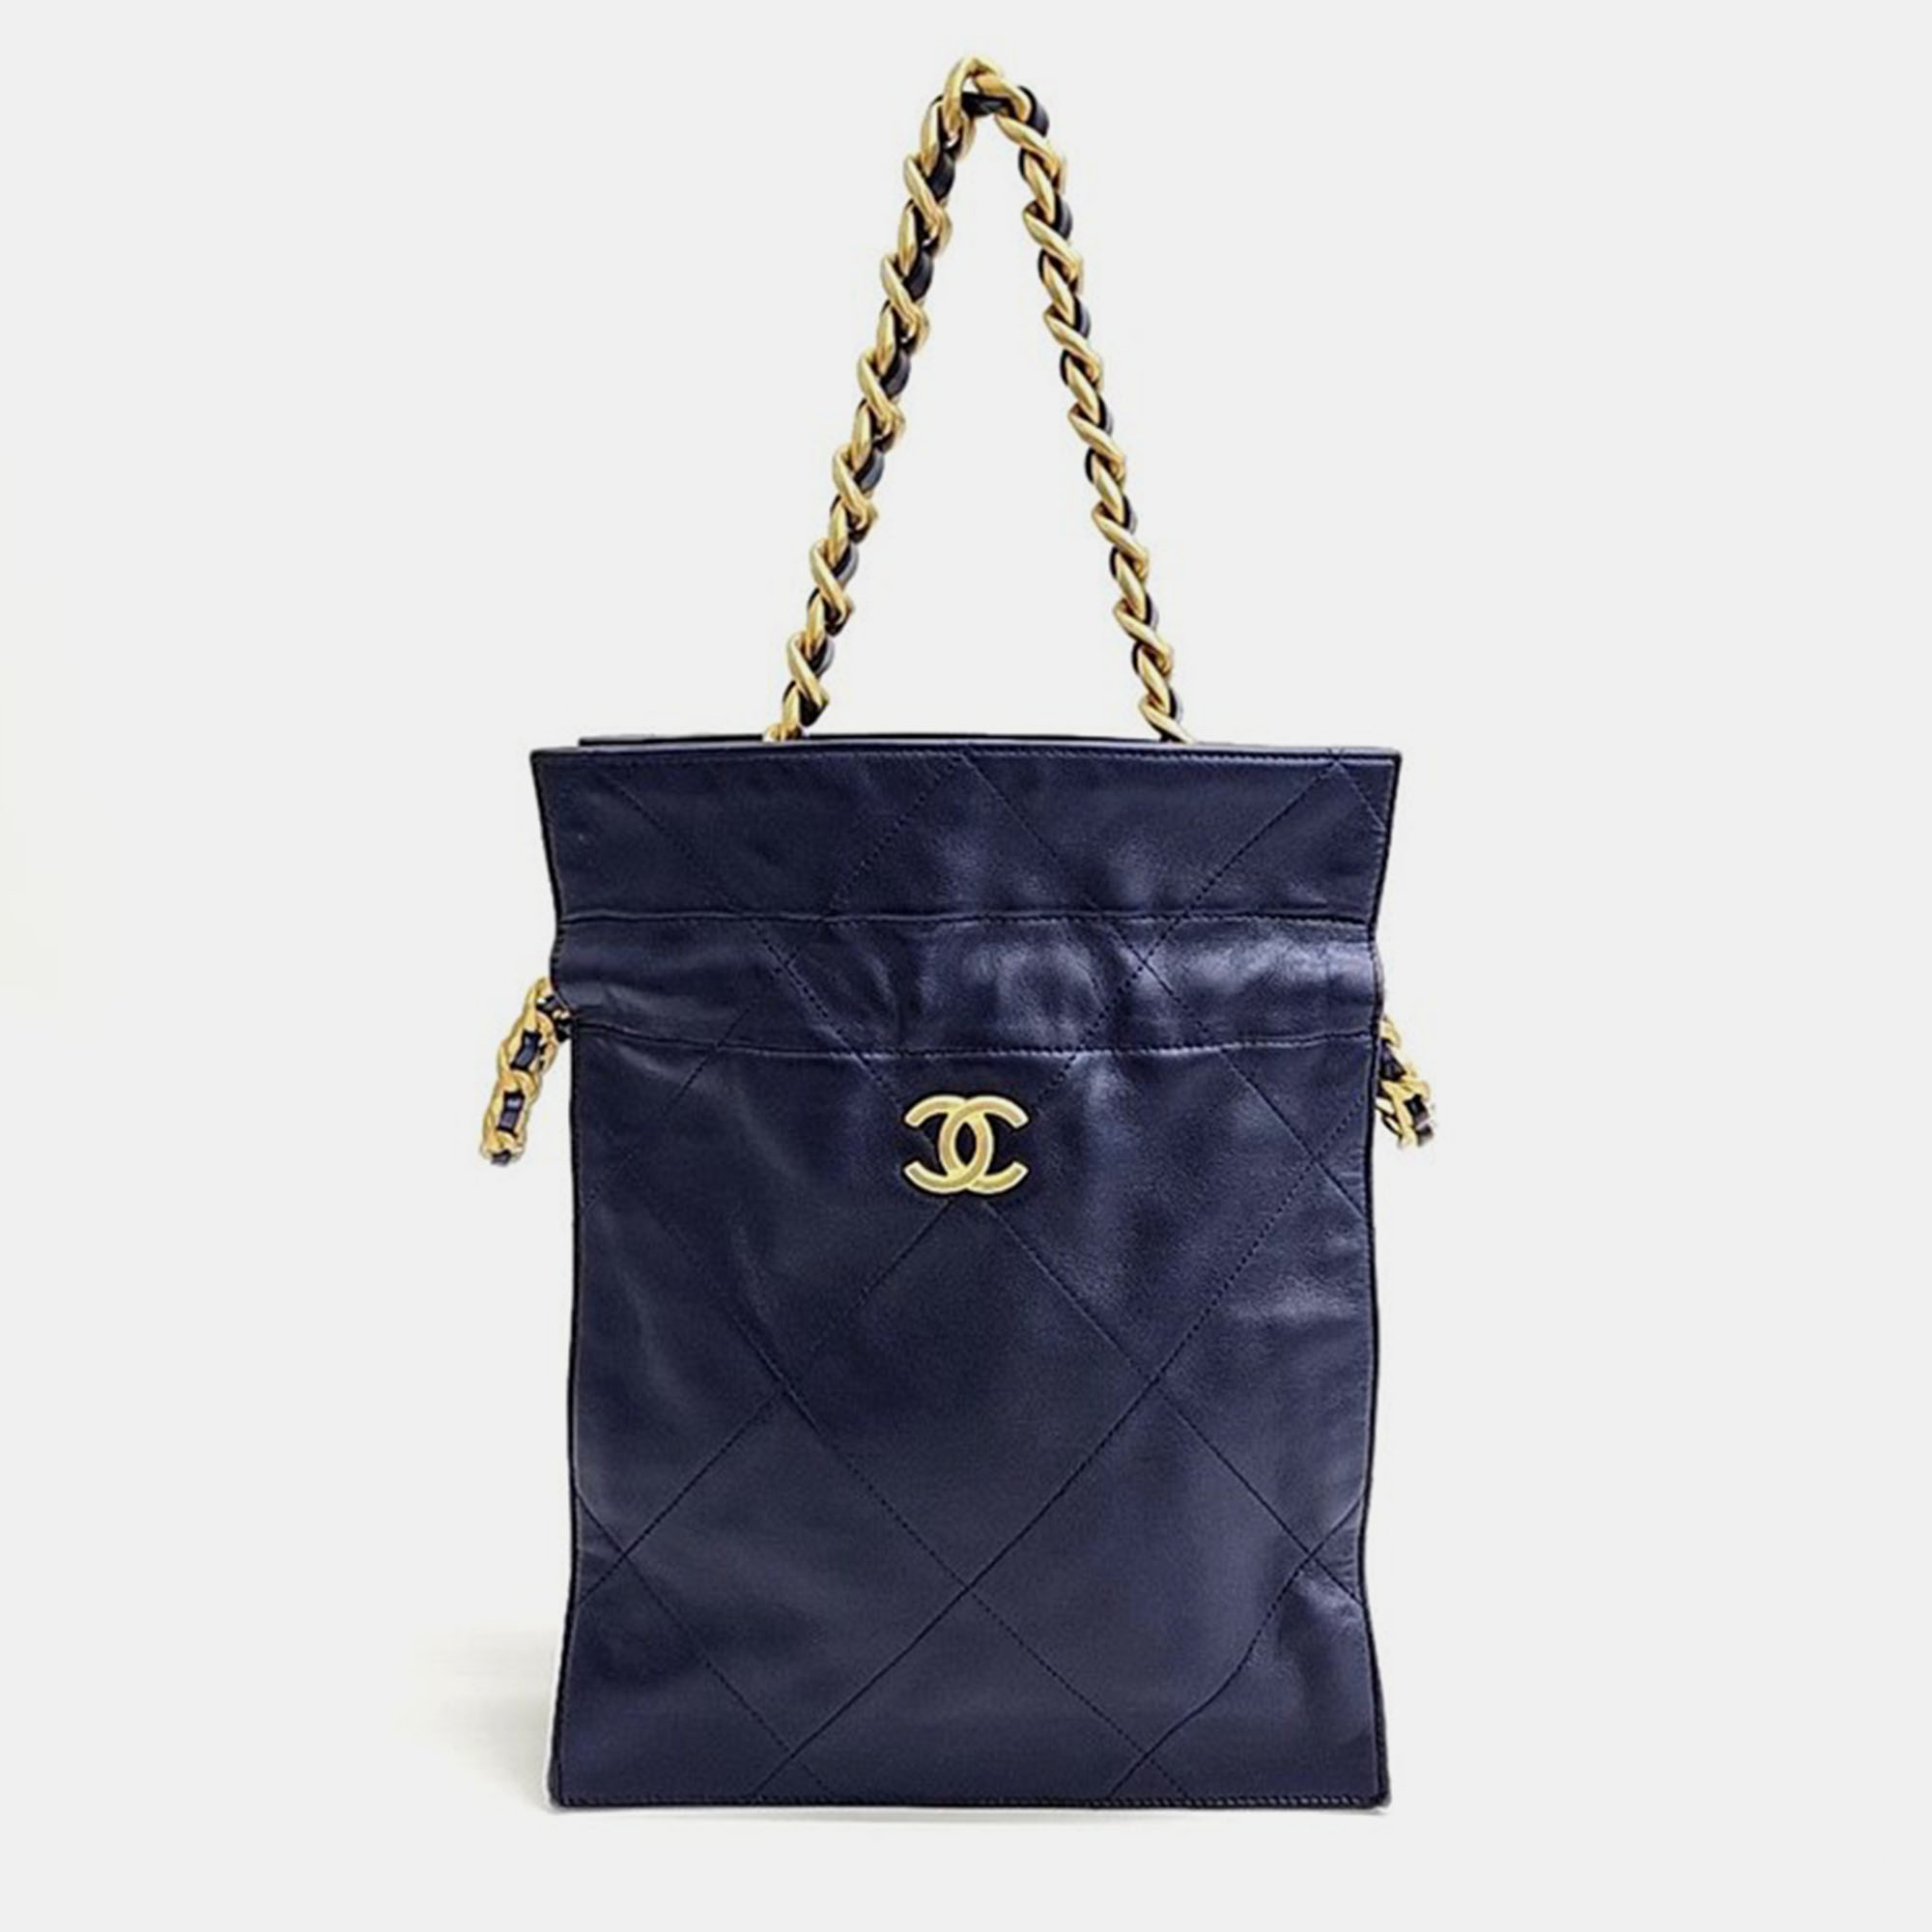 Chanel navy blue leather drawstring chain bucket bag